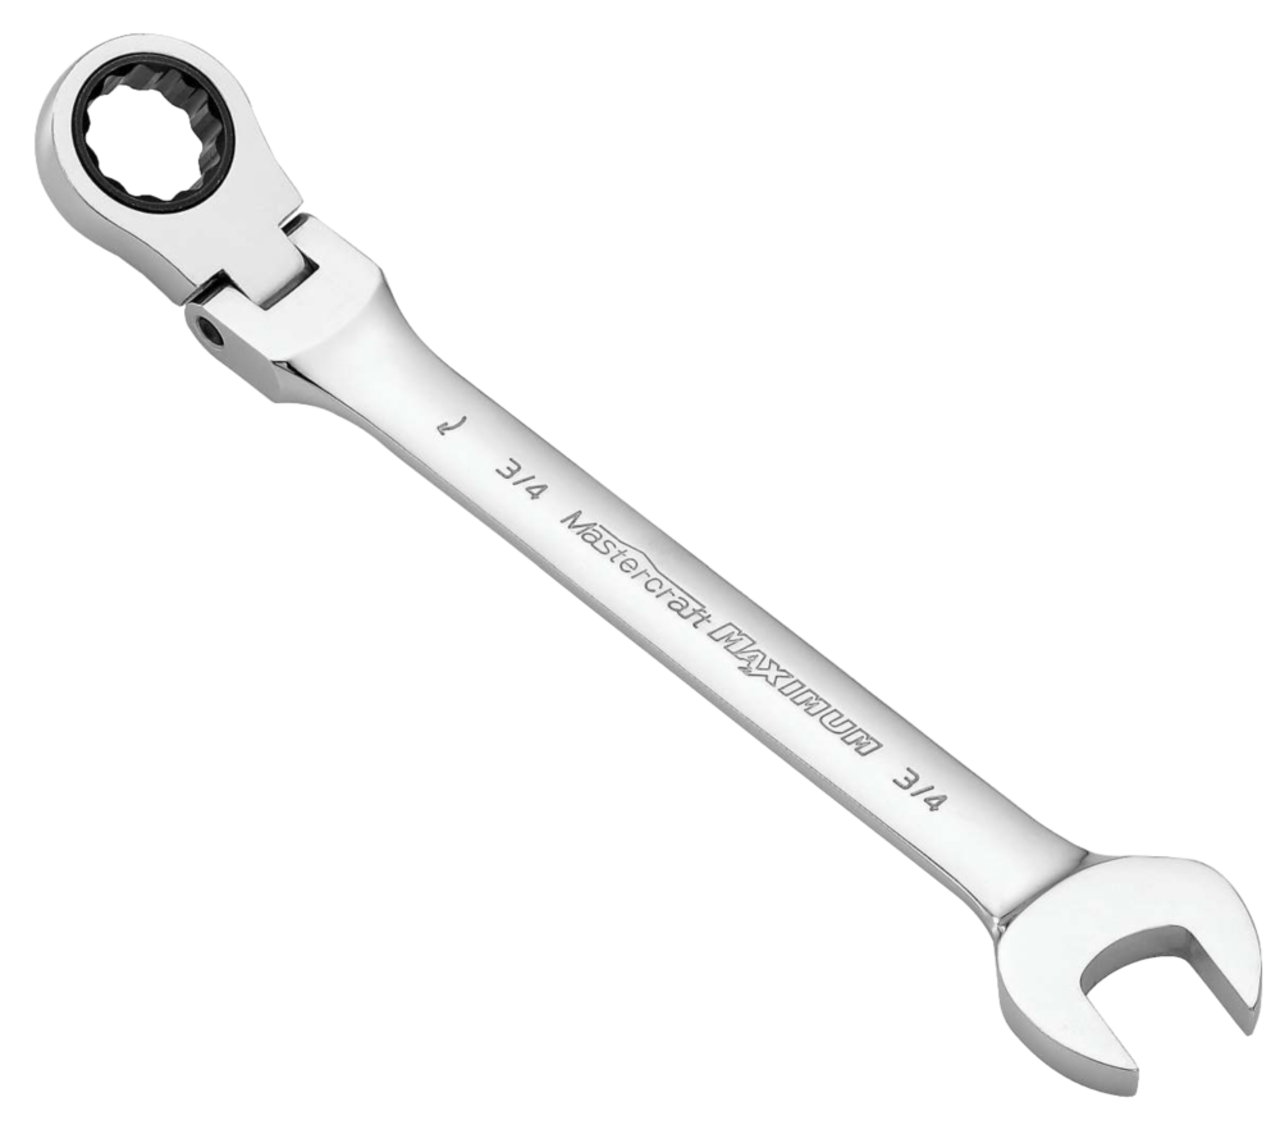 https://media-www.canadiantire.ca/product/fixing/tools/sockets-wrenches/0588852/maximum-3-8-flexhead-wrench-17841ed8-843d-47a9-b610-5975ab0dbd6a.png?imdensity=1&imwidth=640&impolicy=mZoom